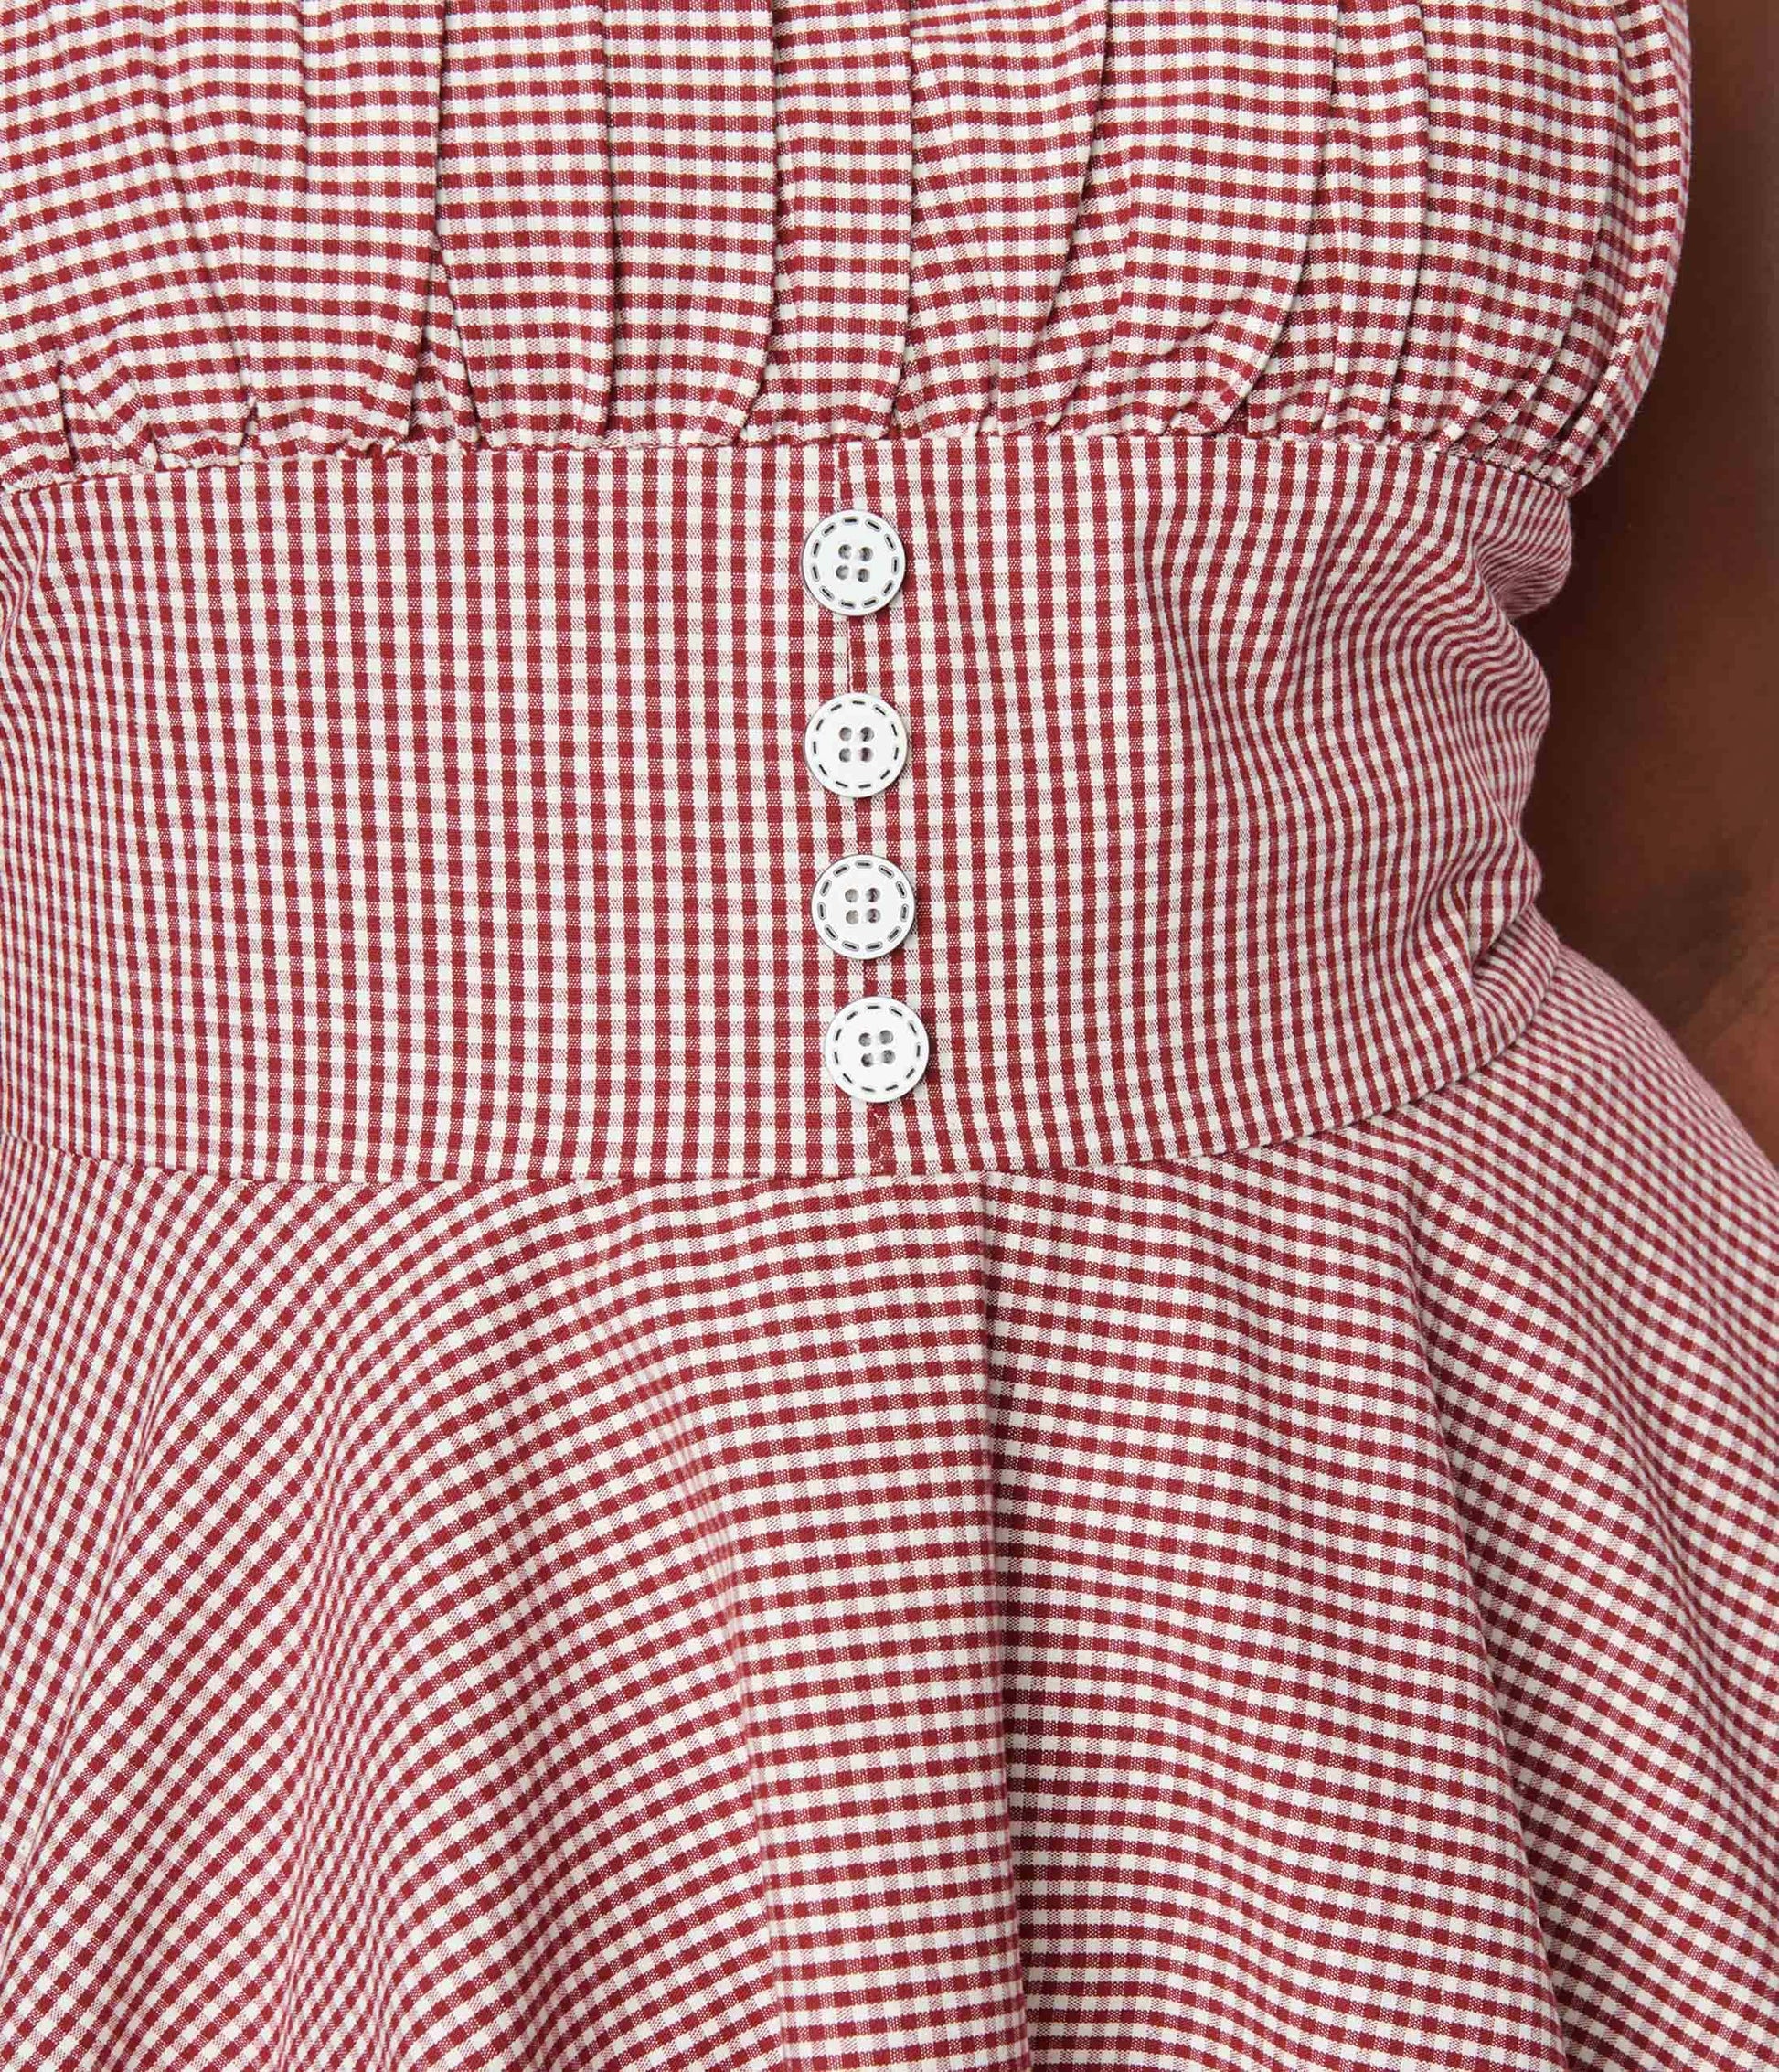 Vintage Style Rust Red Gingham Bianca Swing Dress